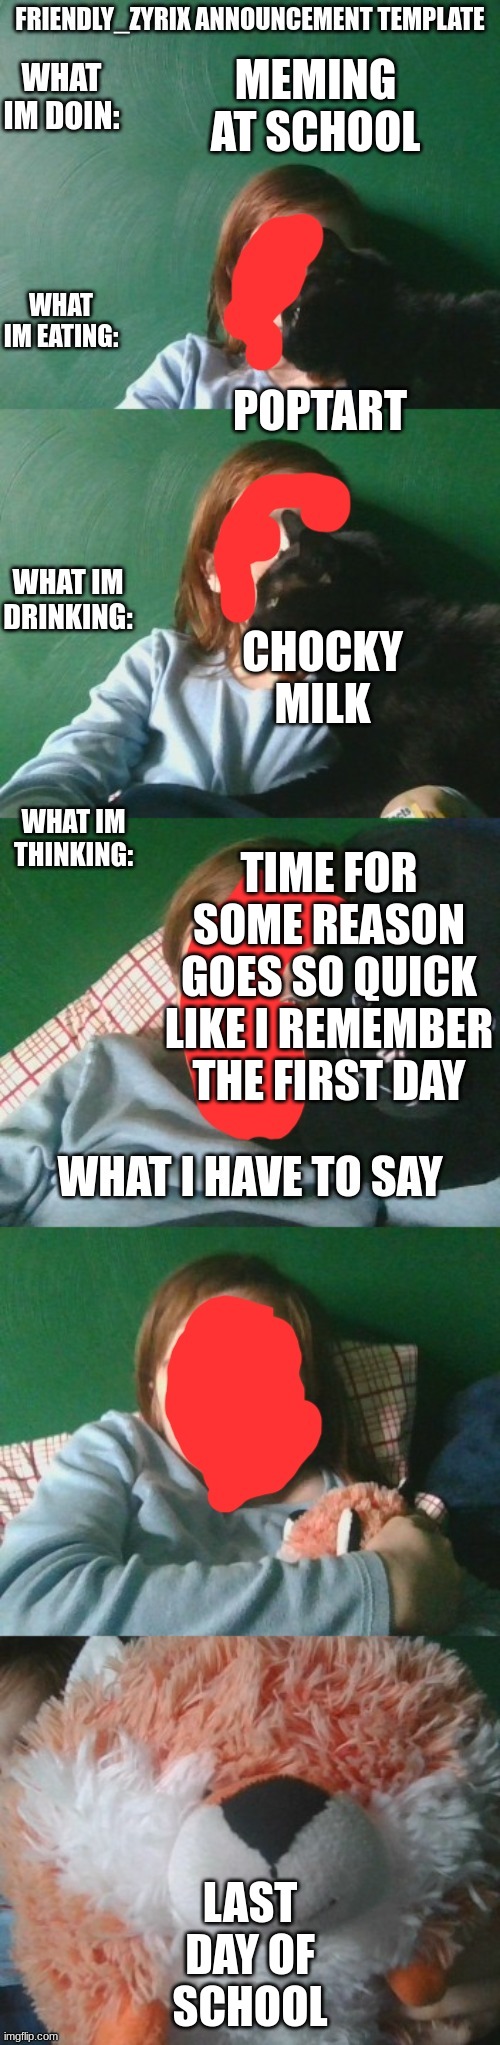 also I haven't grown even one inch so I am NOT ready to get ladies | MEMING AT SCHOOL; POPTART; CHOCKY MILK; TIME FOR SOME REASON GOES SO QUICK LIKE I REMEMBER THE FIRST DAY; LAST DAY OF SCHOOL | image tagged in jhg,bj,n,hjg,bvmn,h | made w/ Imgflip meme maker